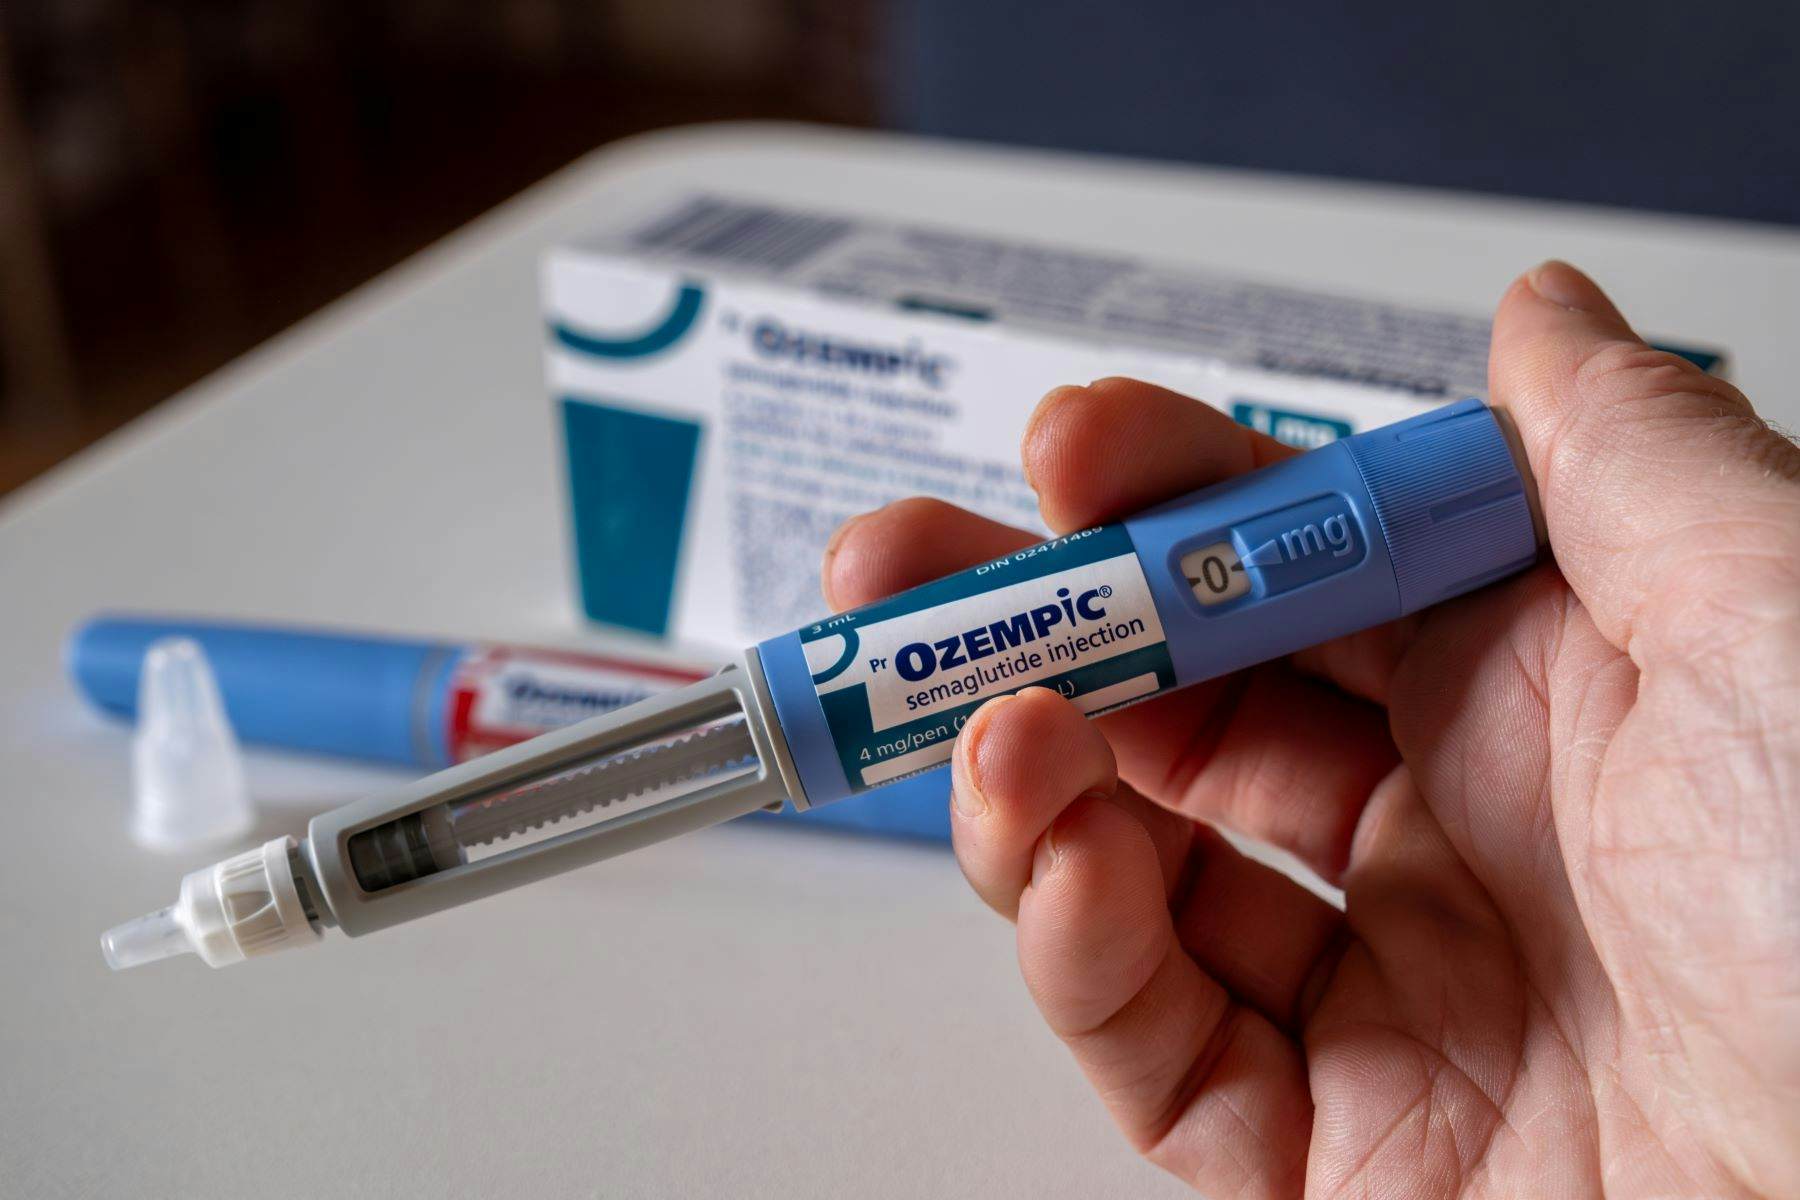 Ozempic injection pen